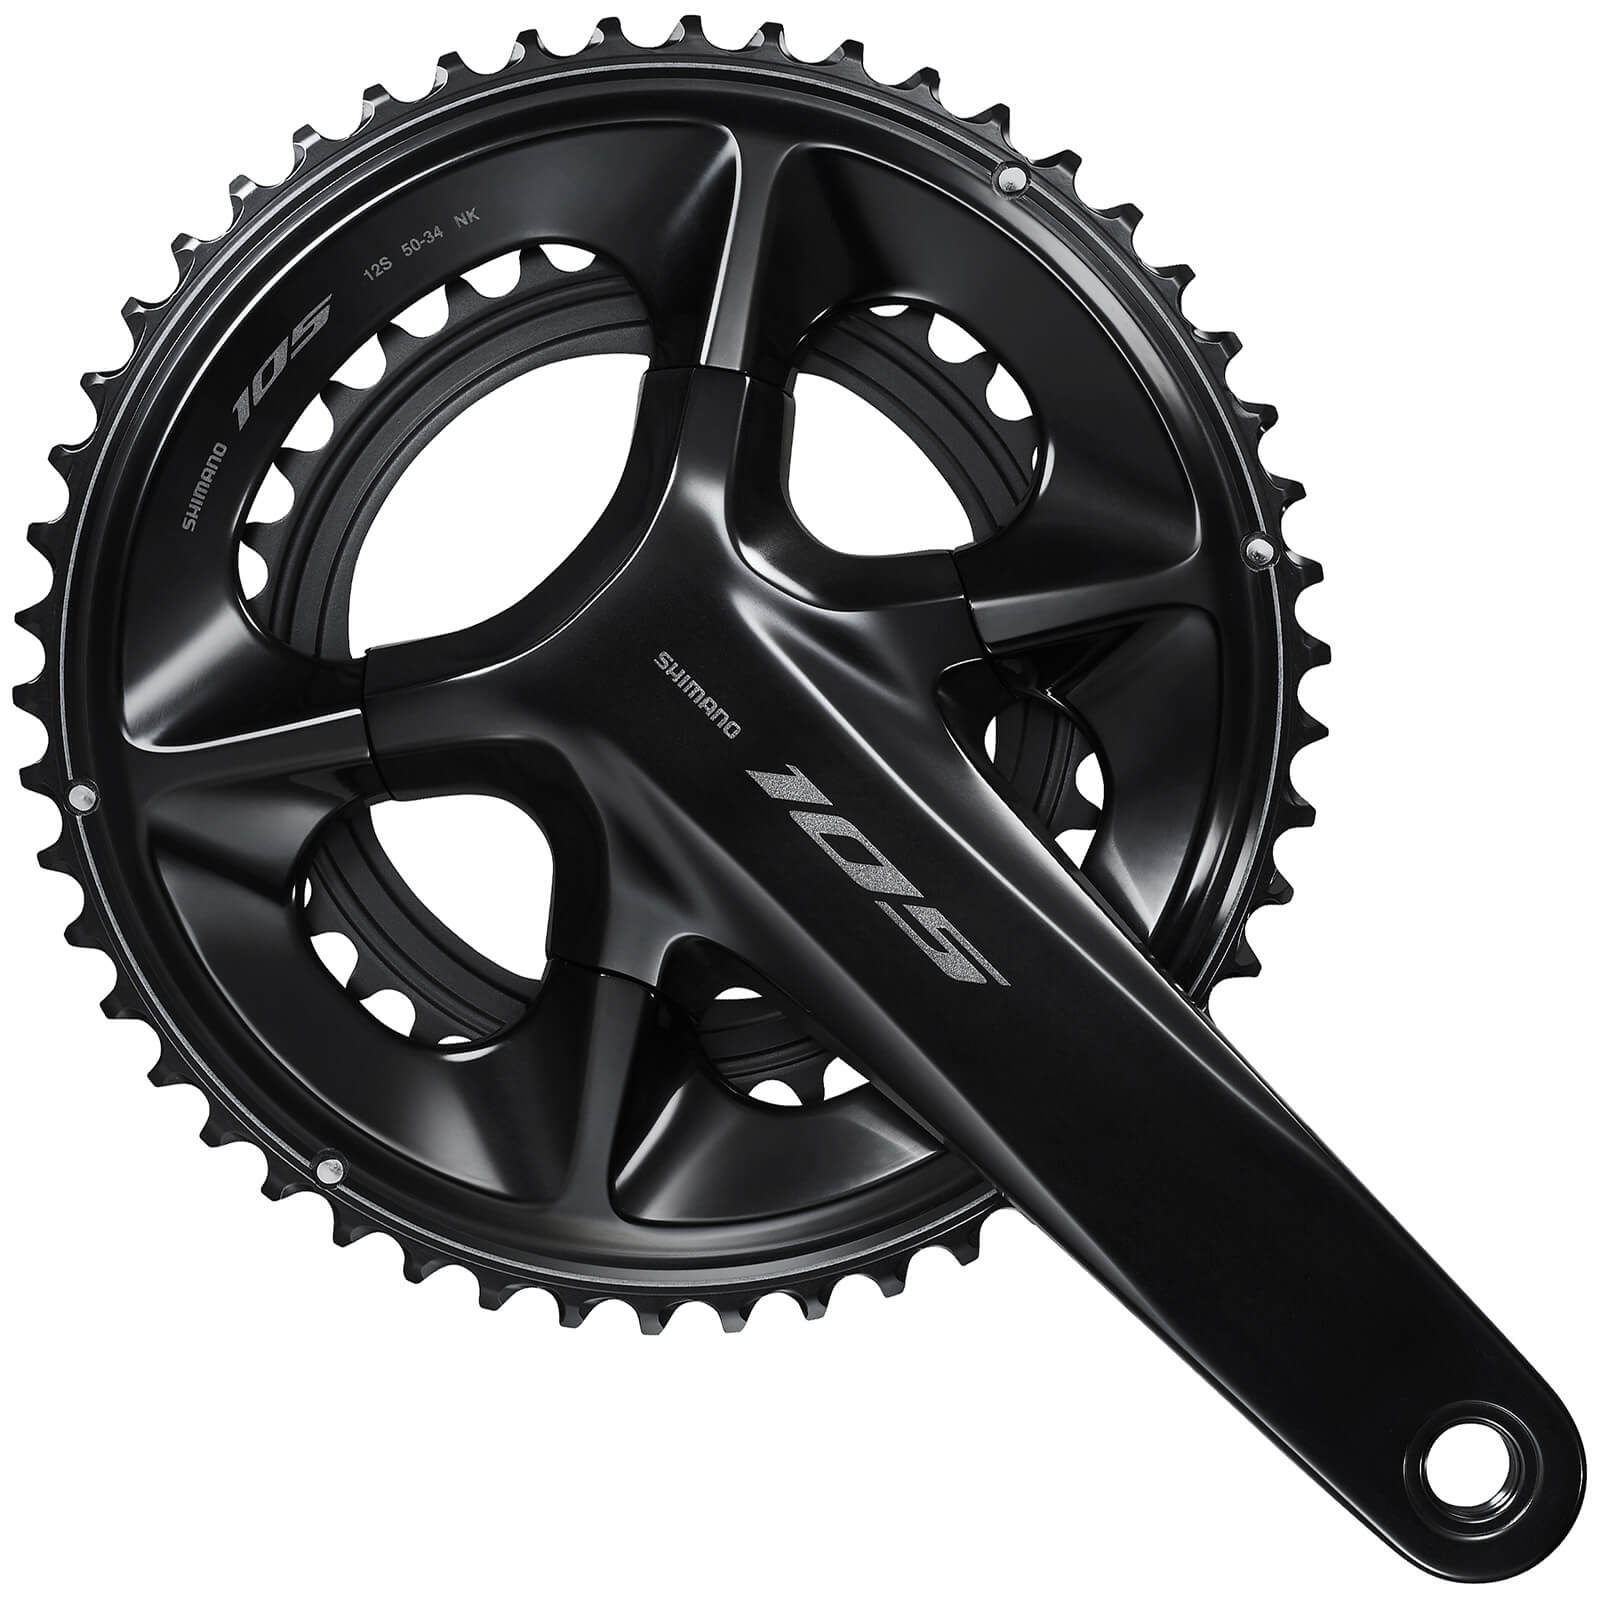 Shimano 105 FC-R7100 12 Speed Chainset - 175mm - 50/34